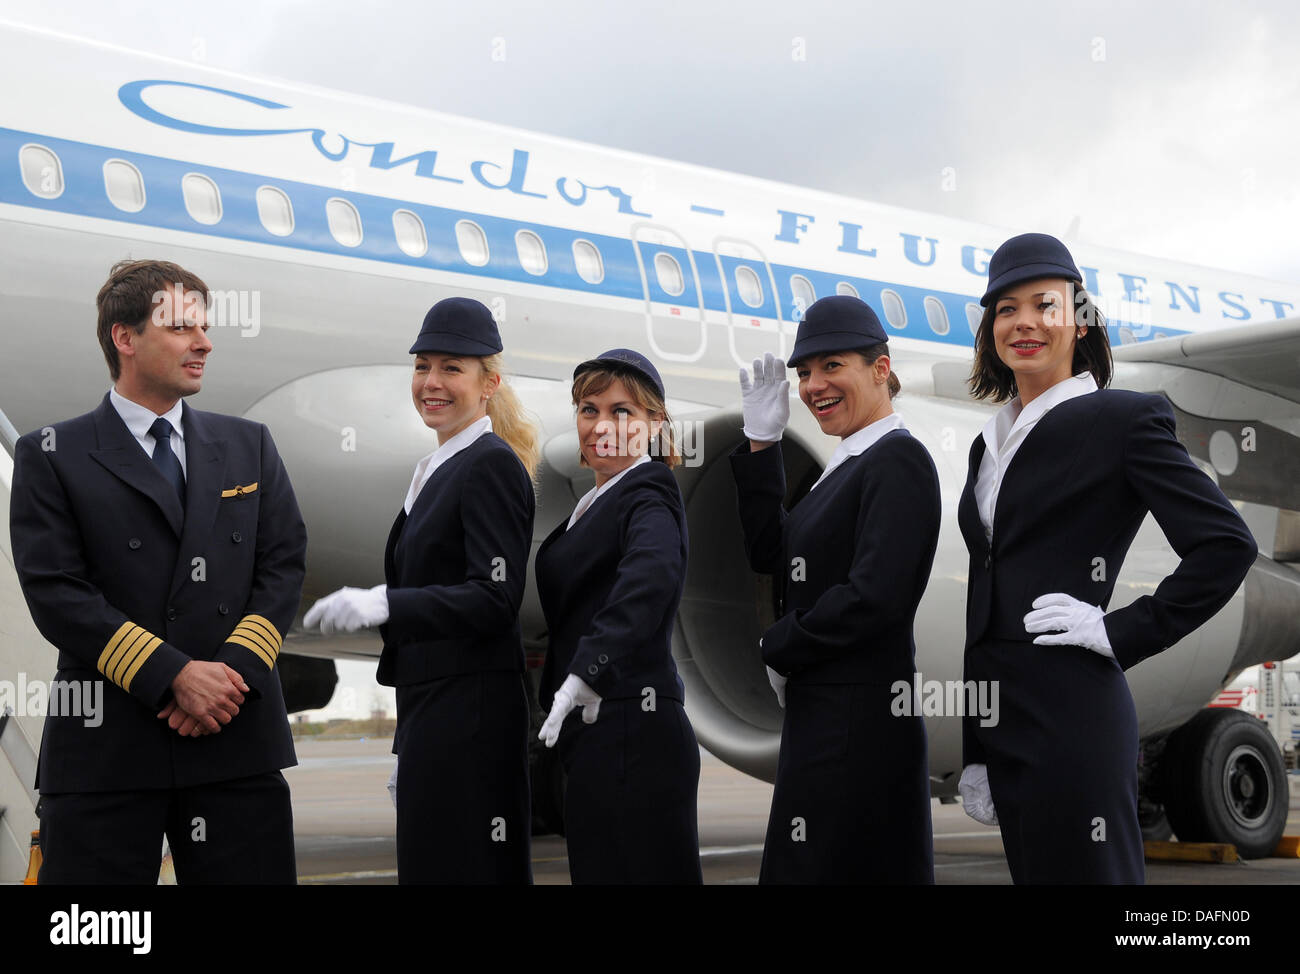 Captain Karl-Peter Ritter (L) and four flight attendants stand in front of a special retro-style Condor aircraft at the aiport in Schoenefeld, Germany, 05 December 2011. The airline calls the plane 'Hans' in honour of the founder of Geisler Tours that chartered the first Condor (Deutsche Flugdienst) aircraft in 1956. Photo: Bernd Settnik Stock Photo